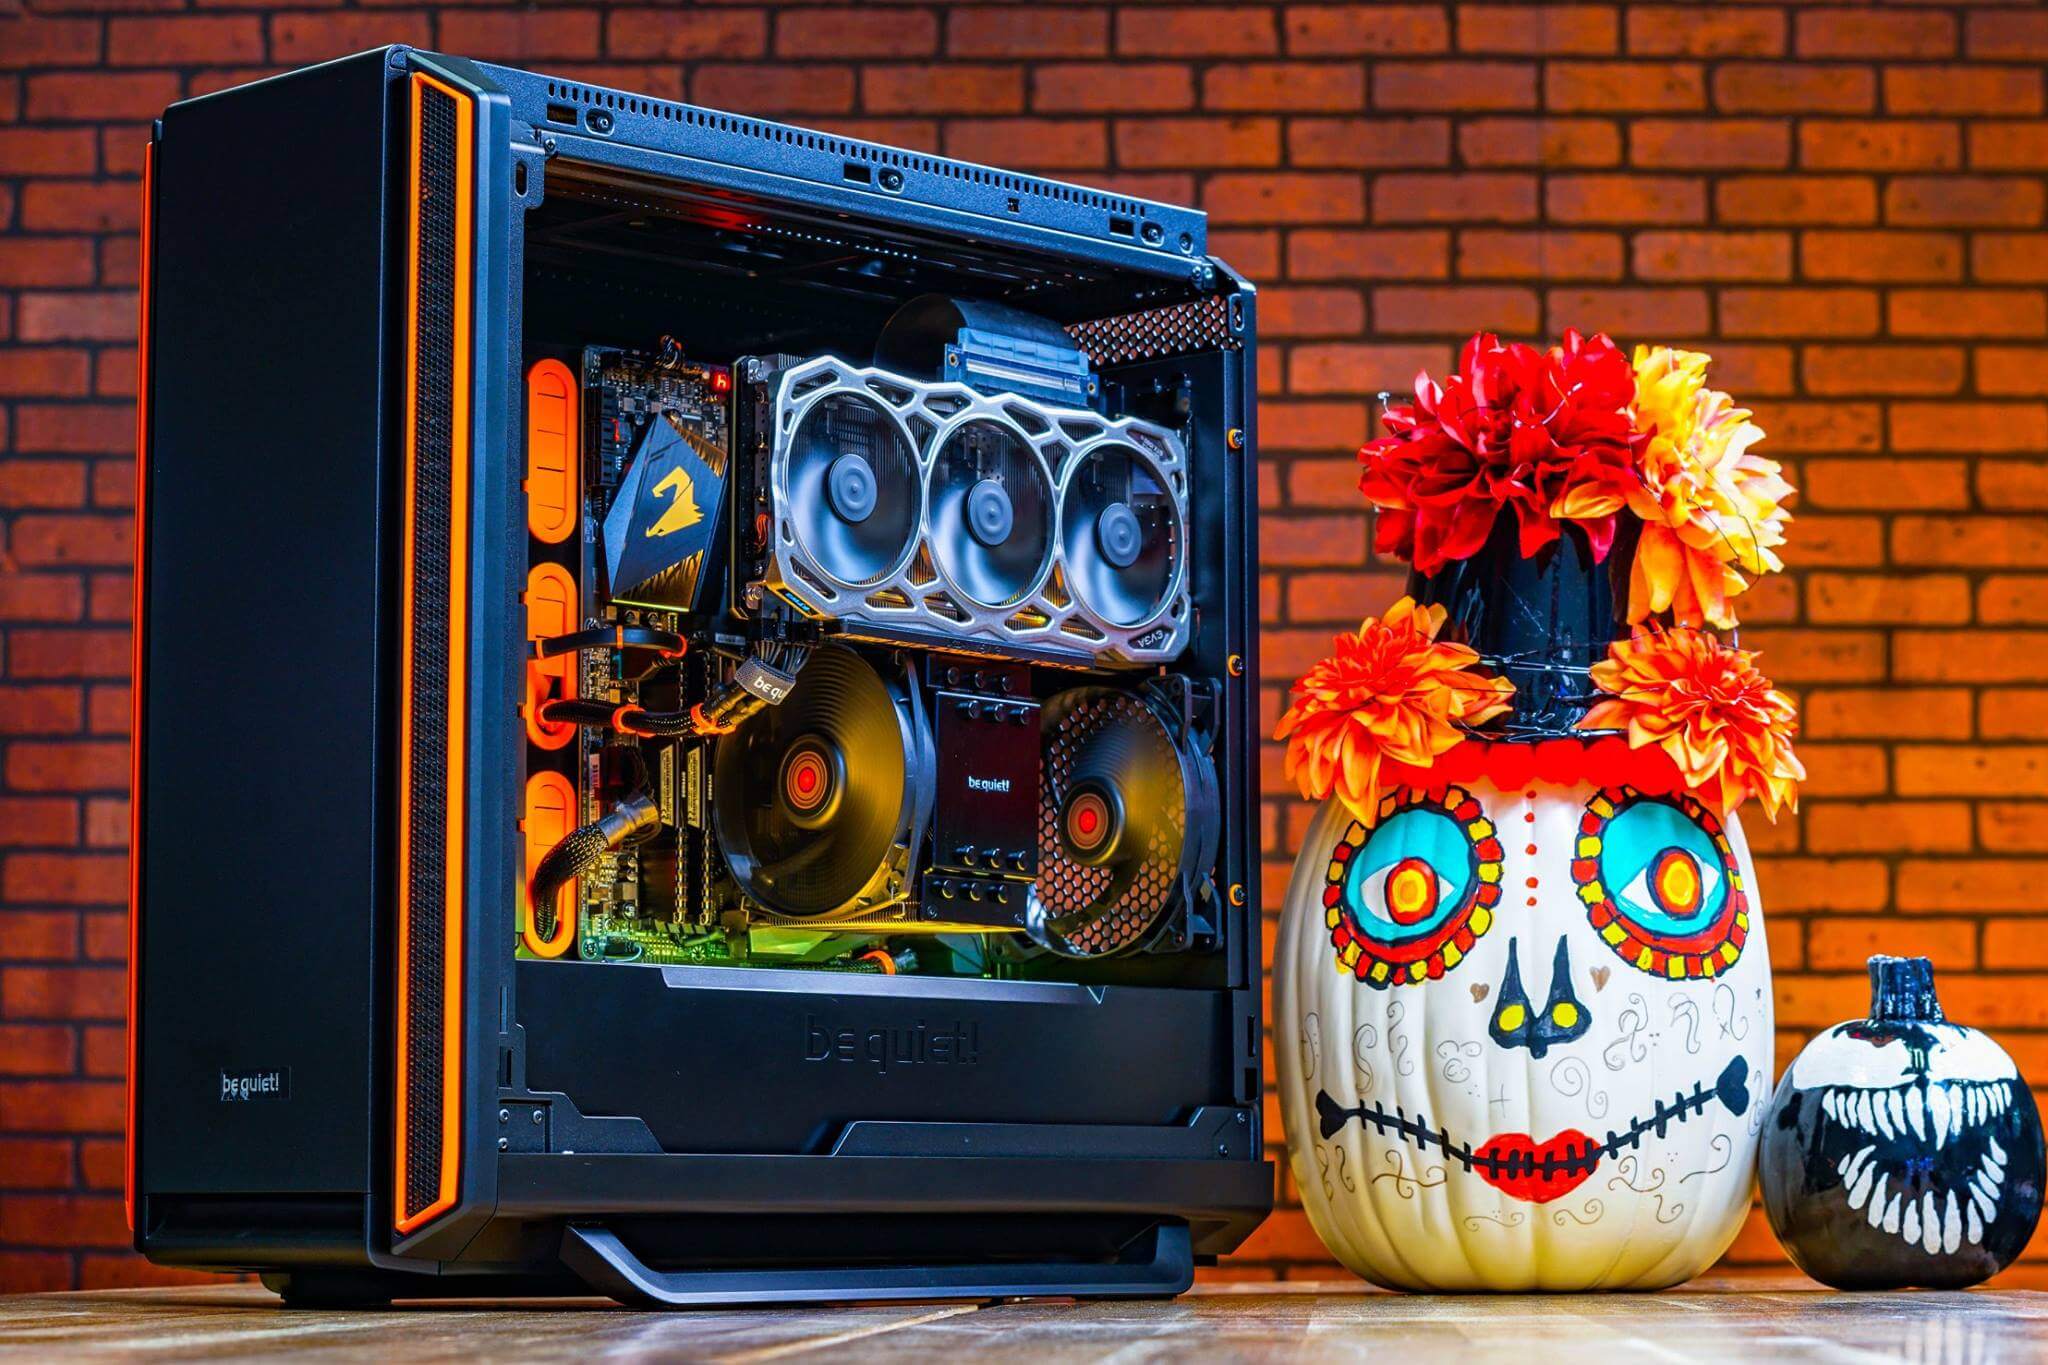 We’re celebrating Halloween in style with our black and orange build based on the Silent Base 801 PC case from BeQuiet!.